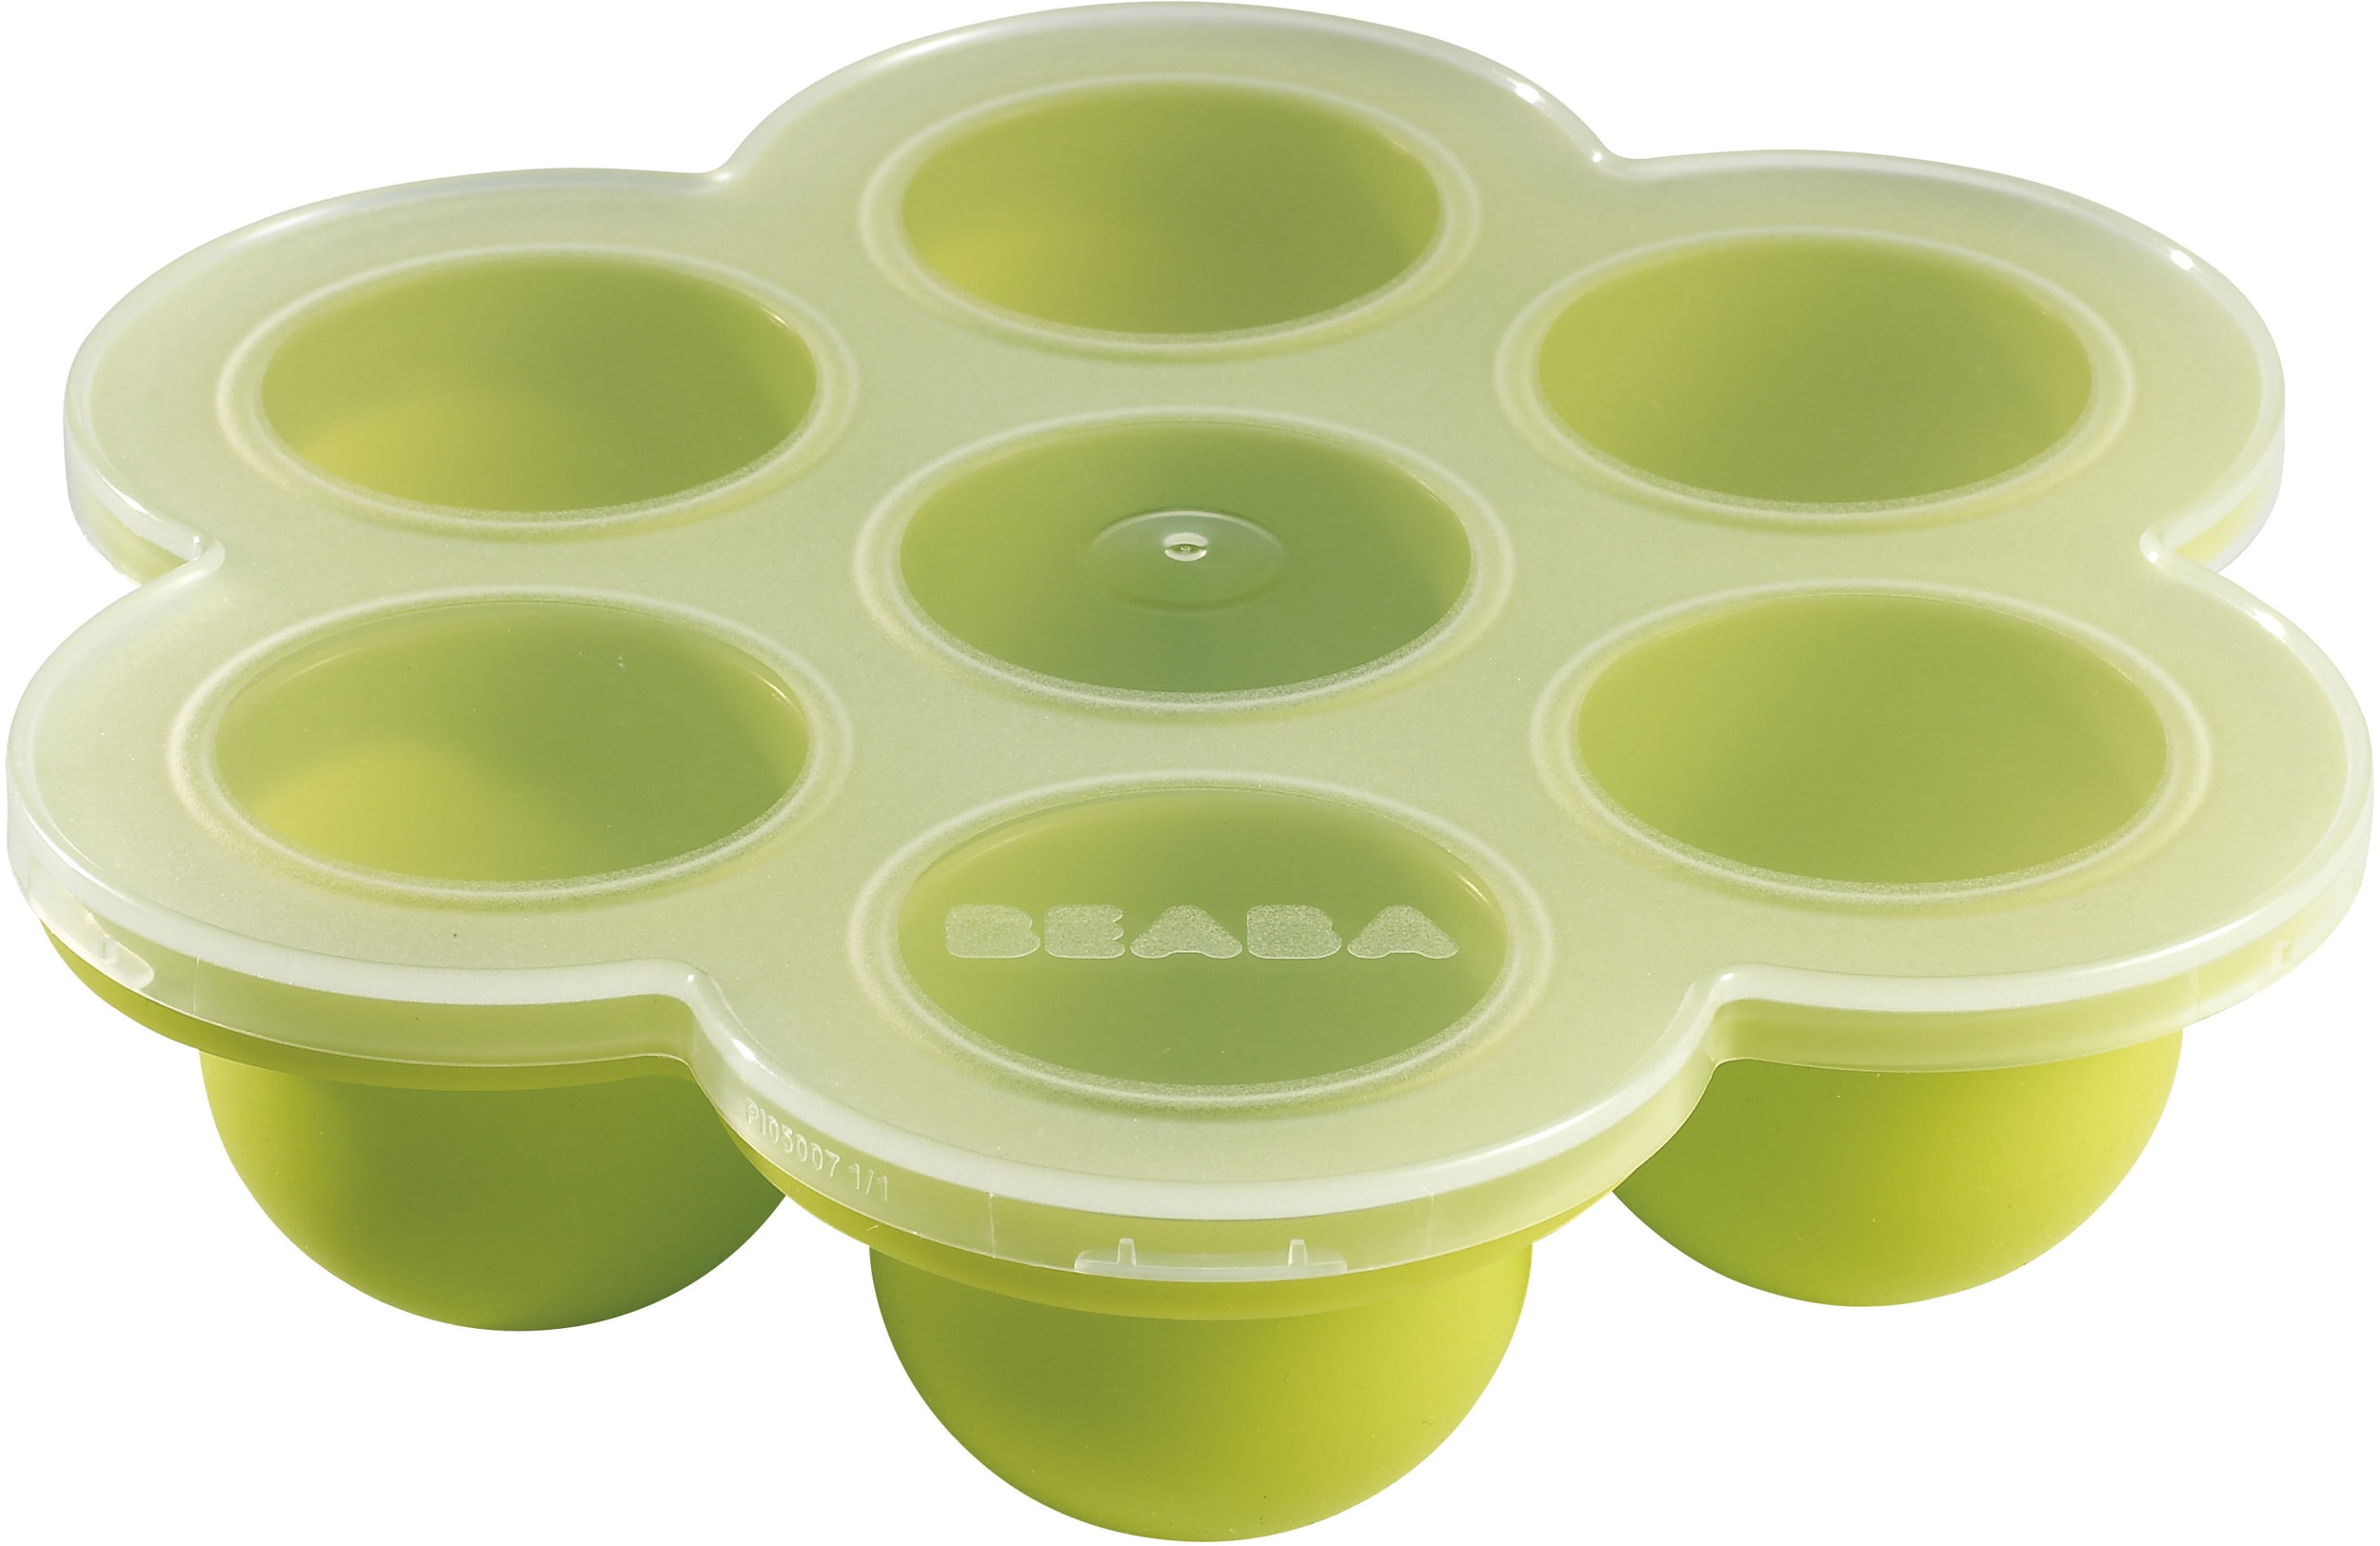 Beaba - Moule Multiportions silicone 6 x 90 ml